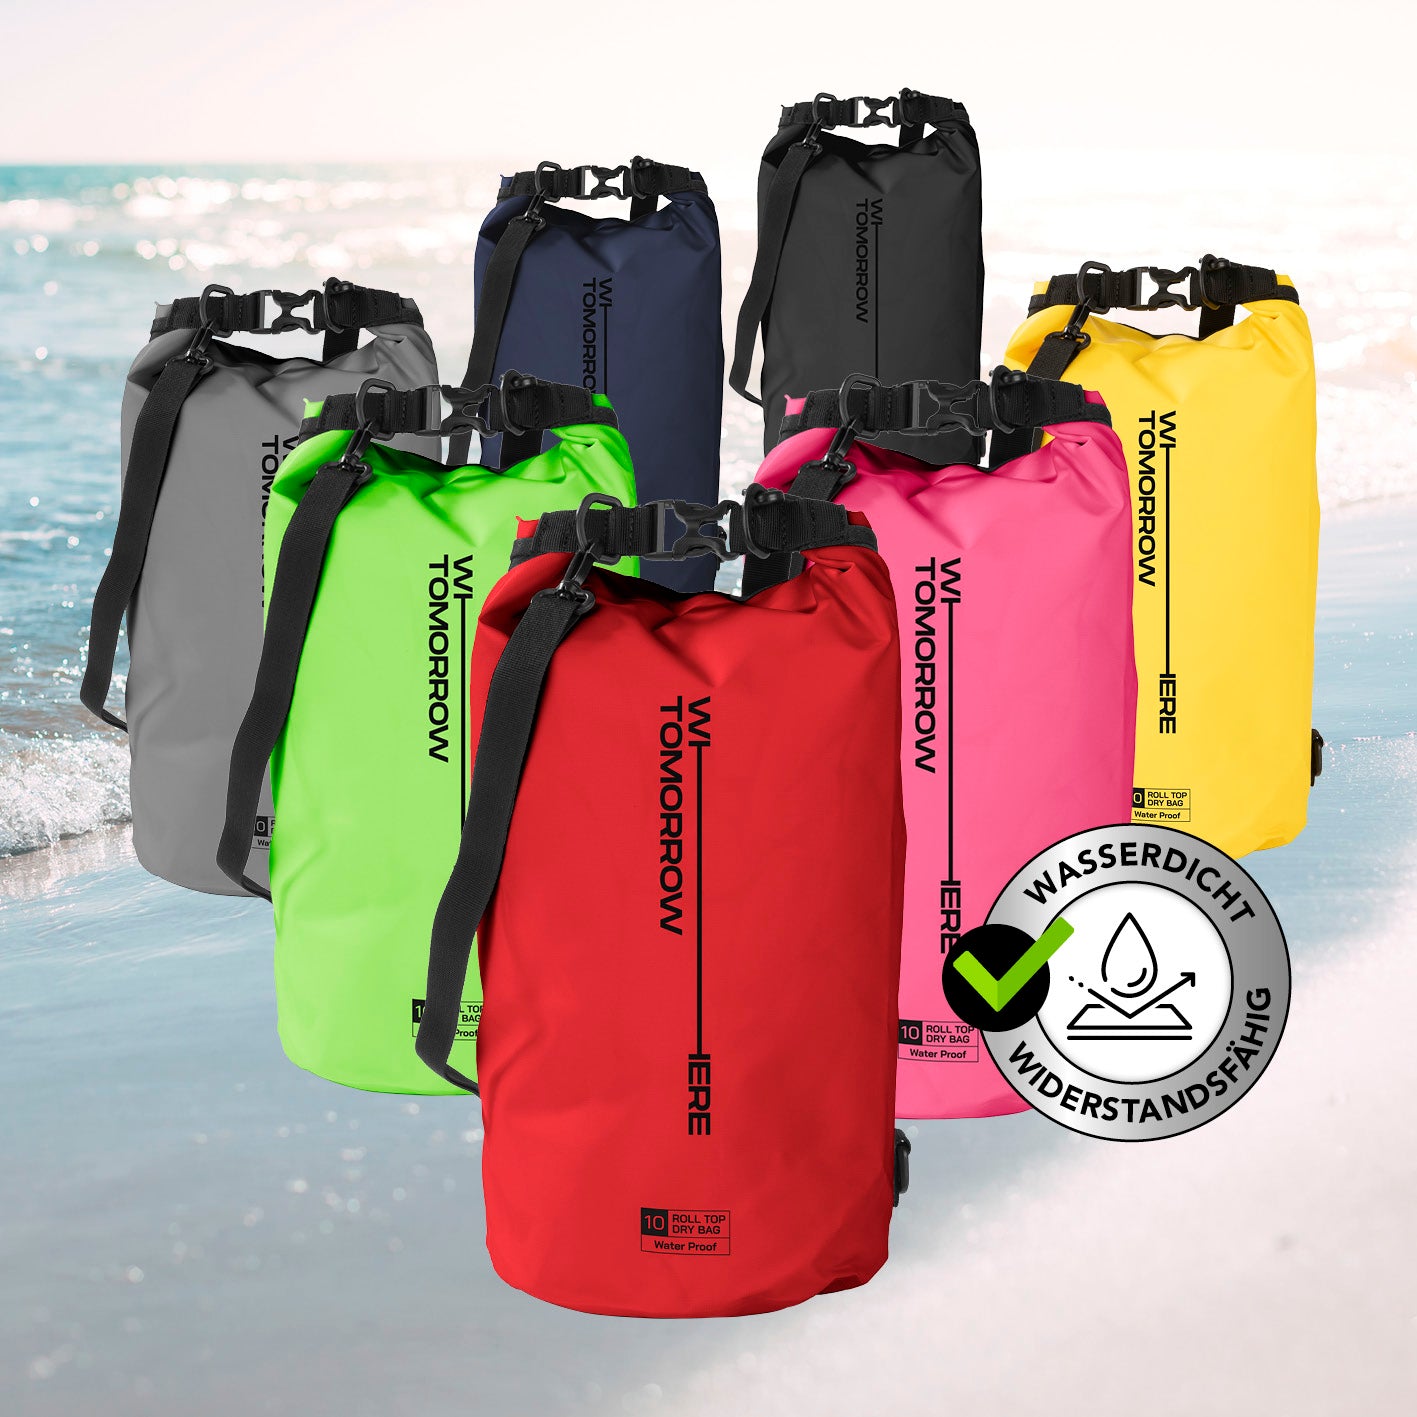 Dry Bag 10L - Style 02 - Rot